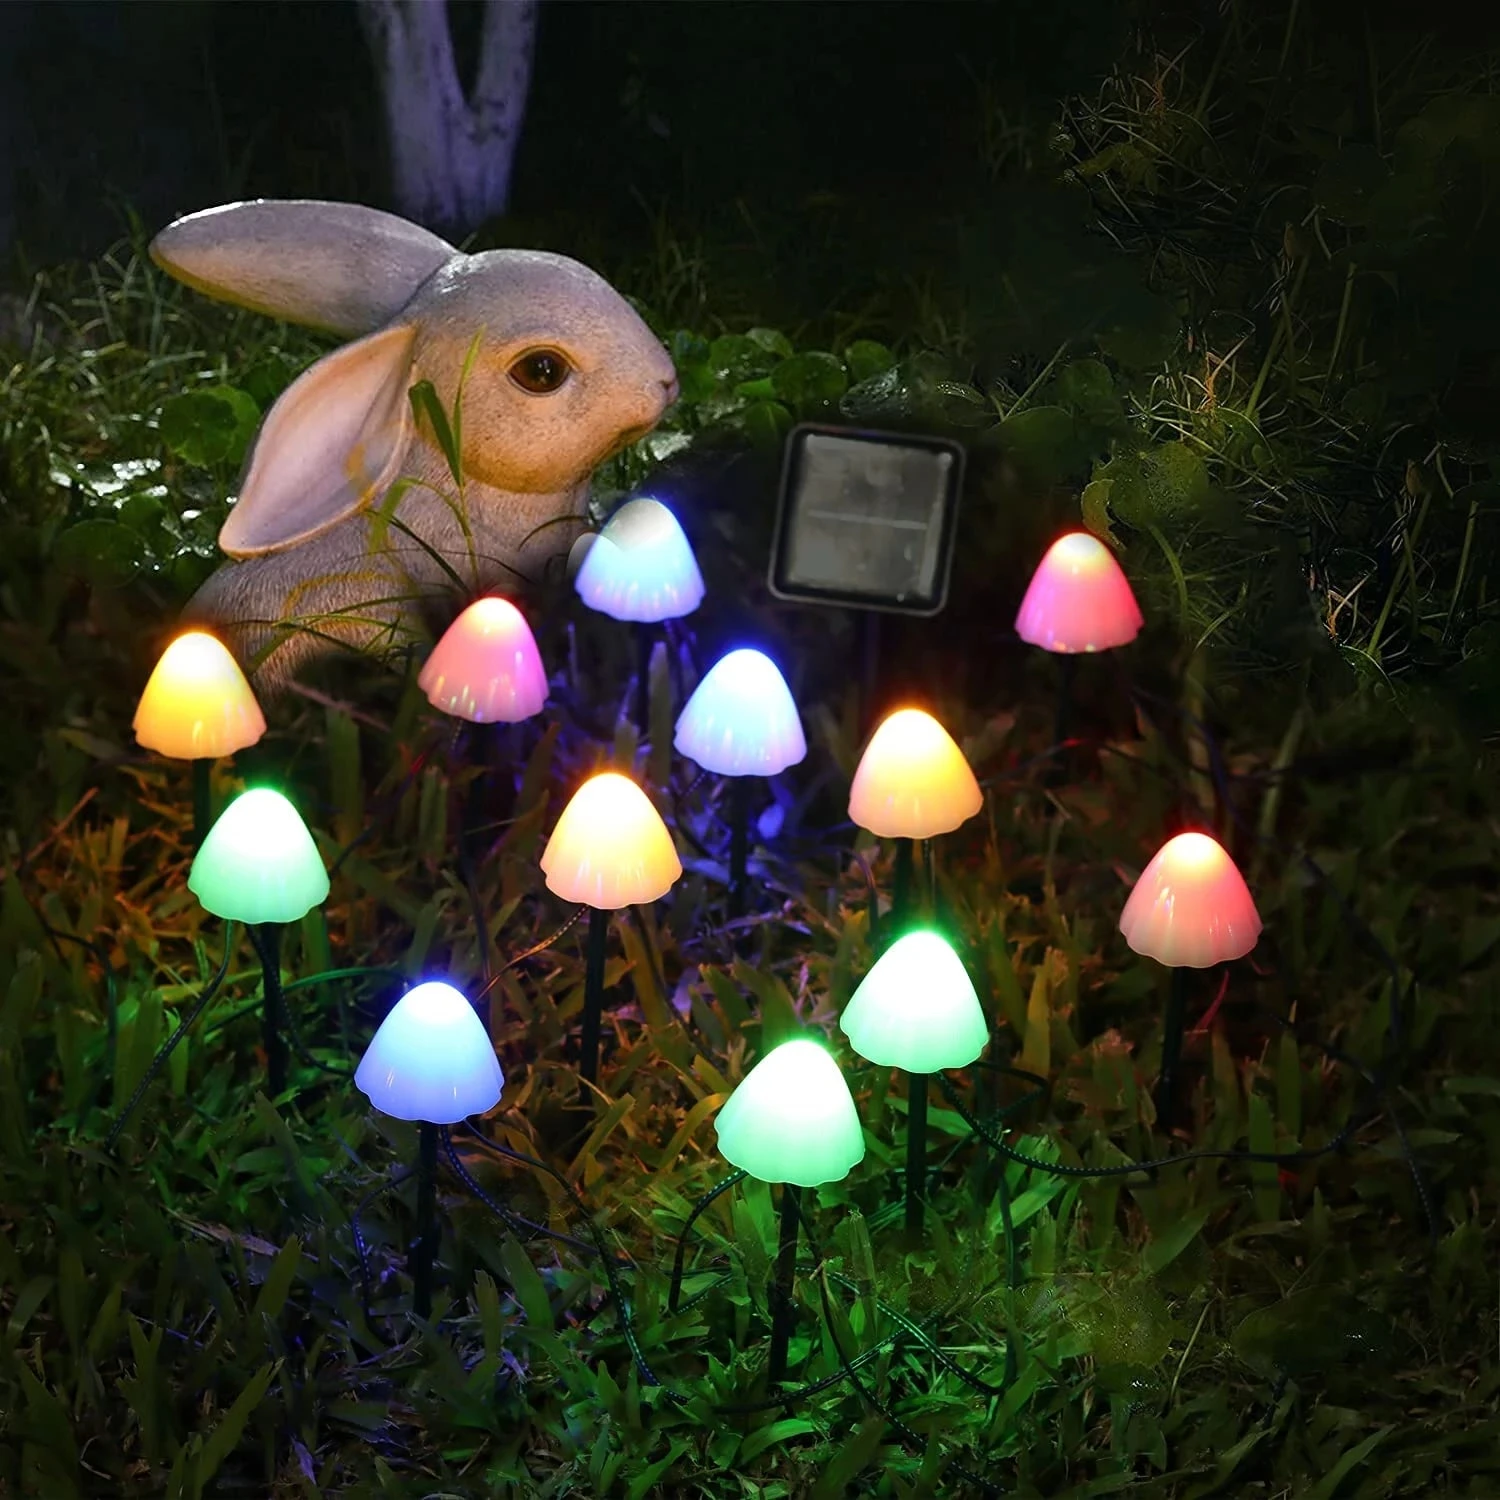 Solar Lights Mushroom Waterproof LED String Light Cute Colorful Landscape Fair Lamp For Garden Patio Pathway Outdoor Decoration